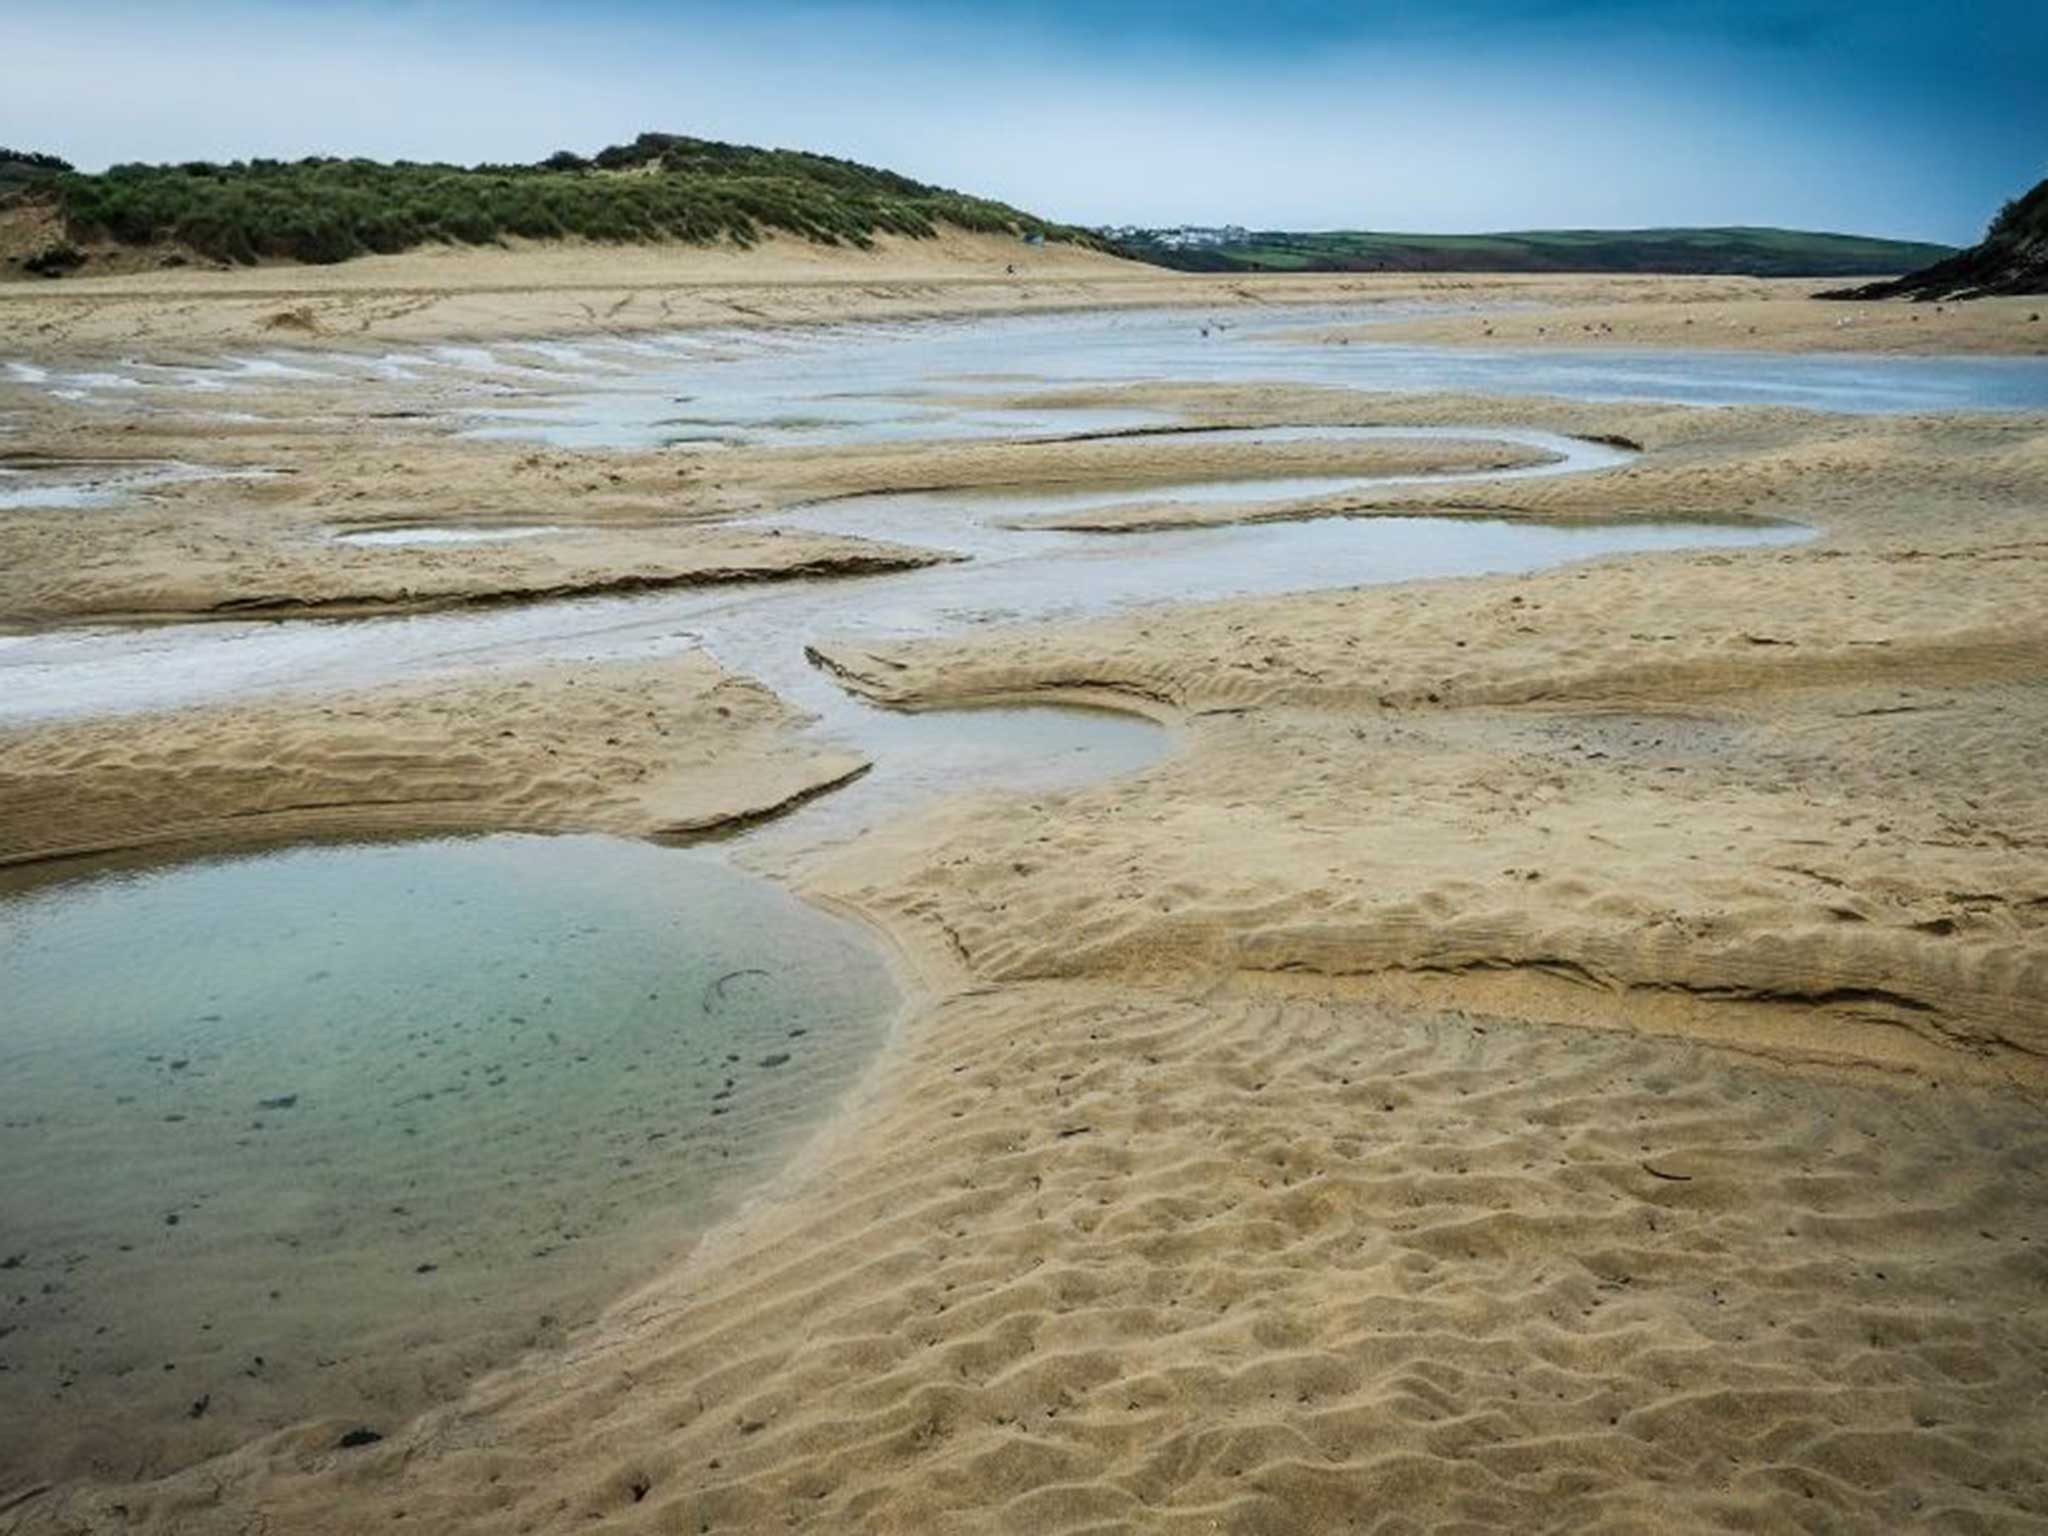 Call of the wild: Places such as Cornwall’s Gannel estuary are sanctuaries for people as much as birds